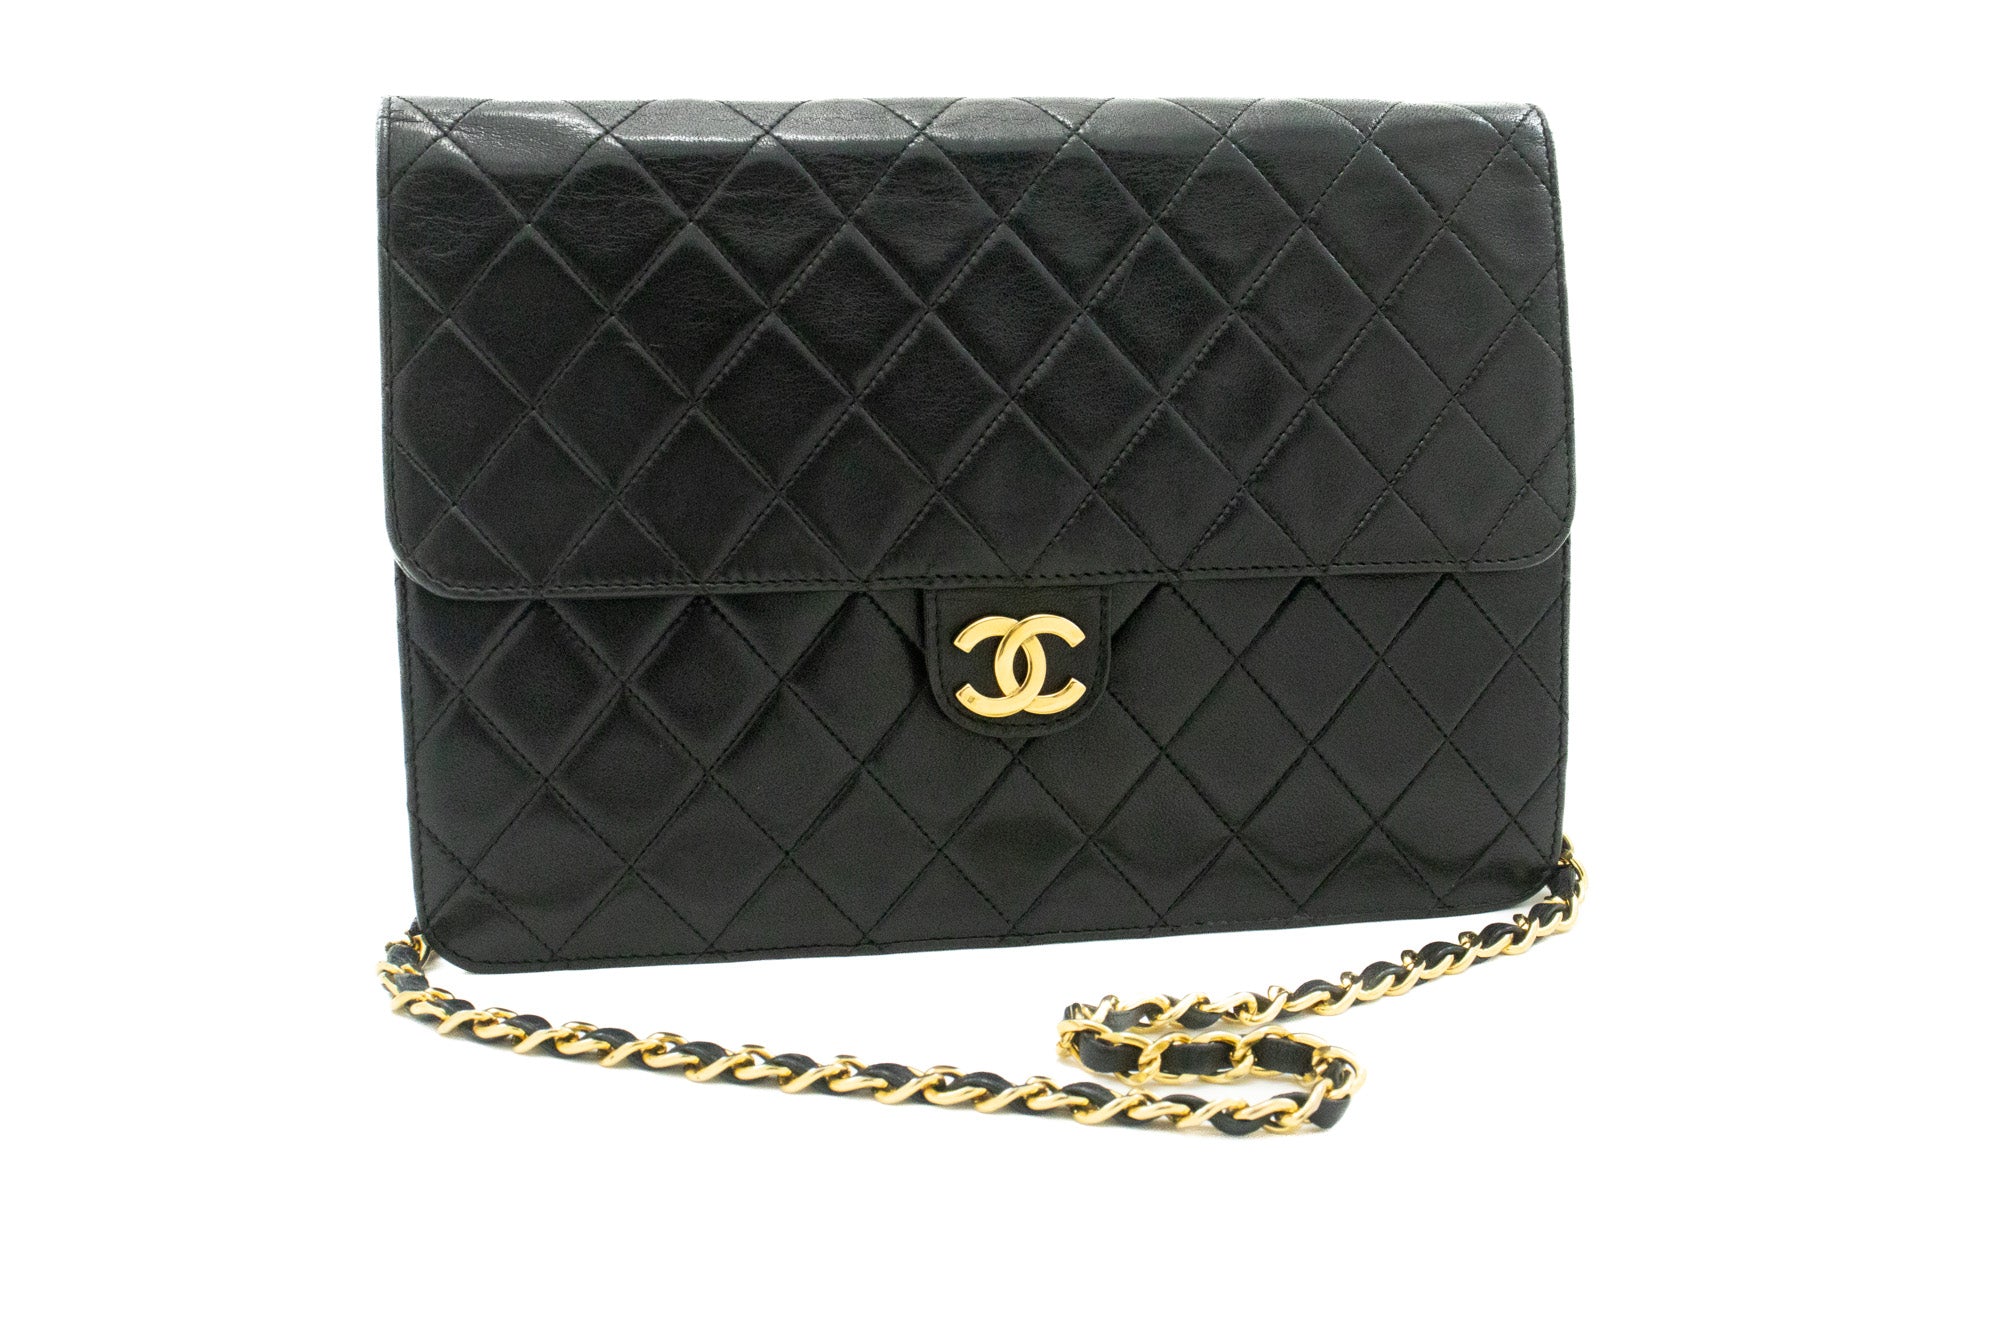 1996 Chanel Black Quilted Lambskin Vintage Jumbo Classic Single